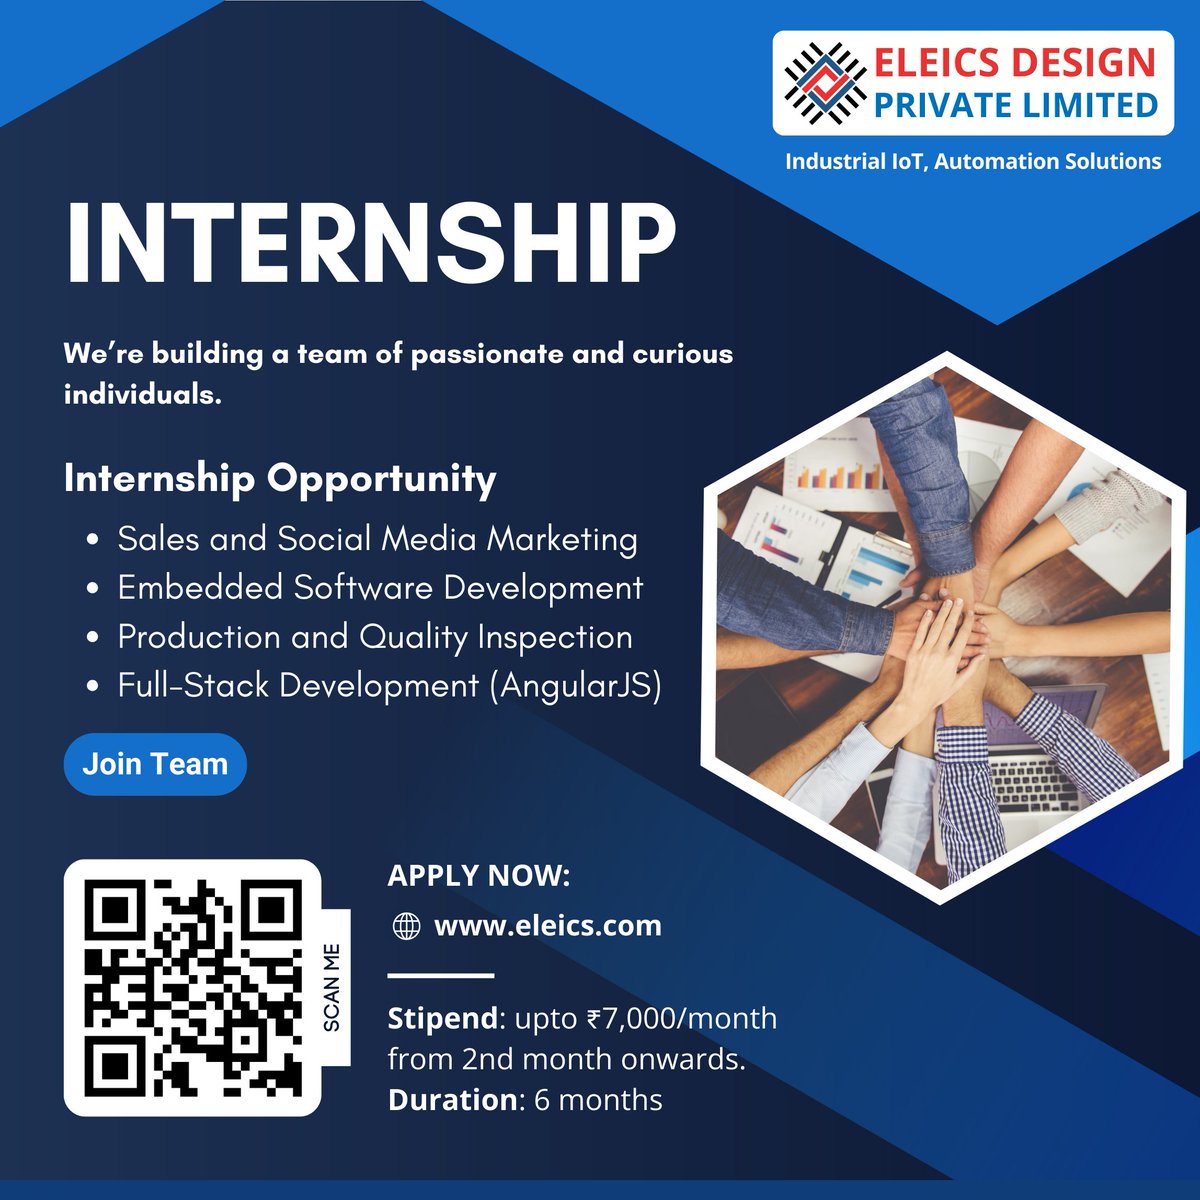 🔍 Internship Opporturnity in Gandhinagar.⚡

We are looking for fresh talent for the multiple Internship positions at Eleics Design Private Limited. 

Apply now: bit.ly/edpl-internship

#internshipalert #internship #Freshers #CareerOpportunity #GandhinagarJobs #internetofthings